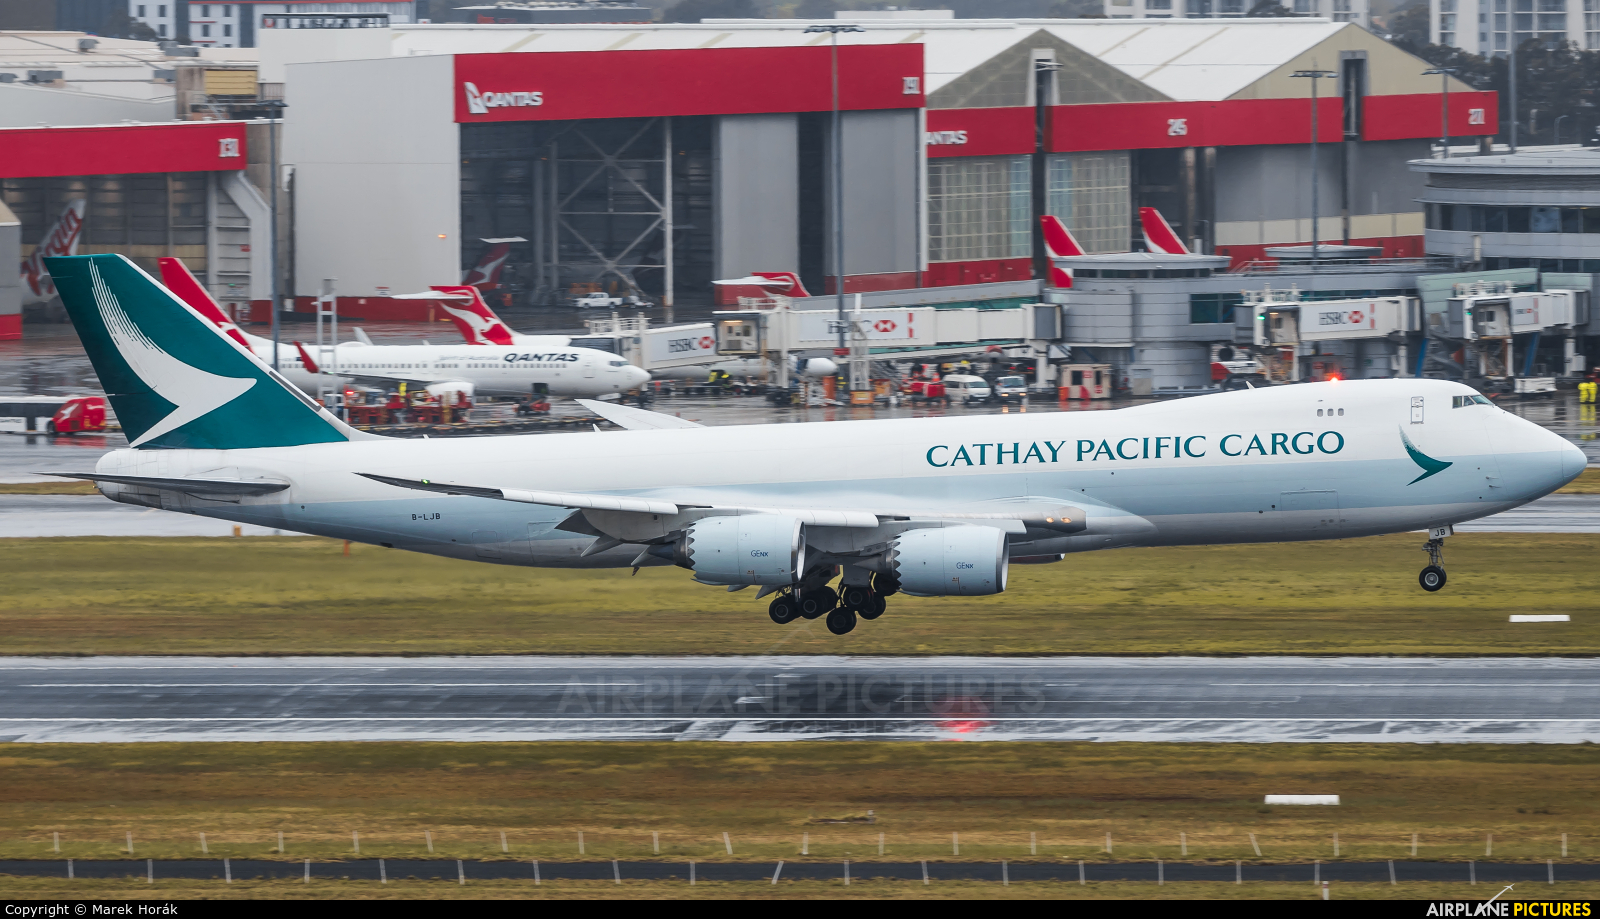 Cathay Pacific Cargo B-LJB aircraft at Sydney - Kingsford Smith Intl, NSW